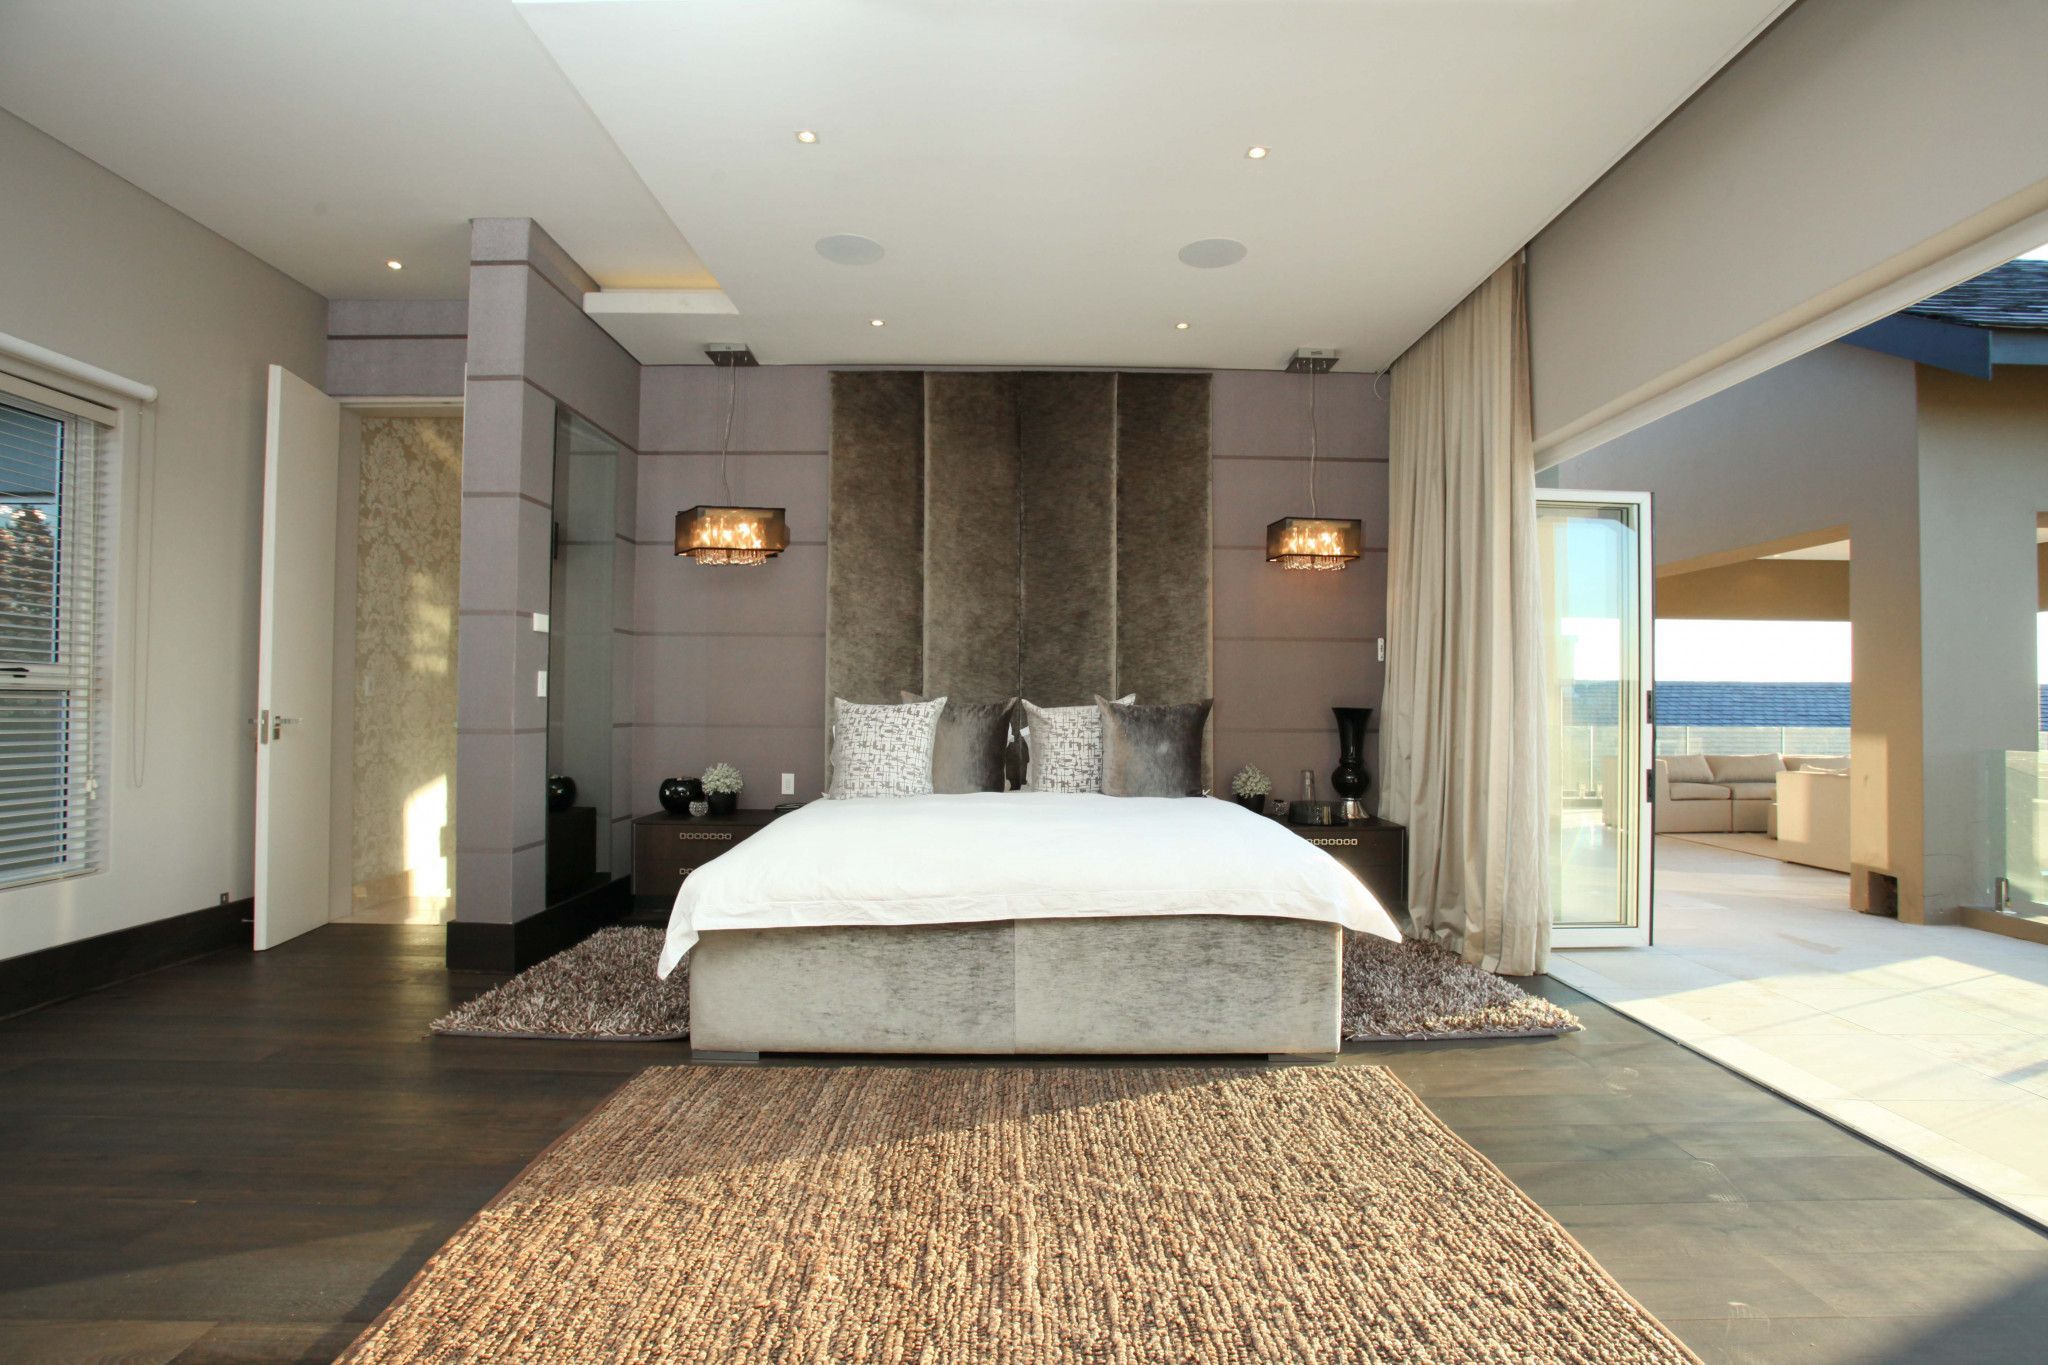 World's best bedrooms with a view - South Africa MiDranD (2)